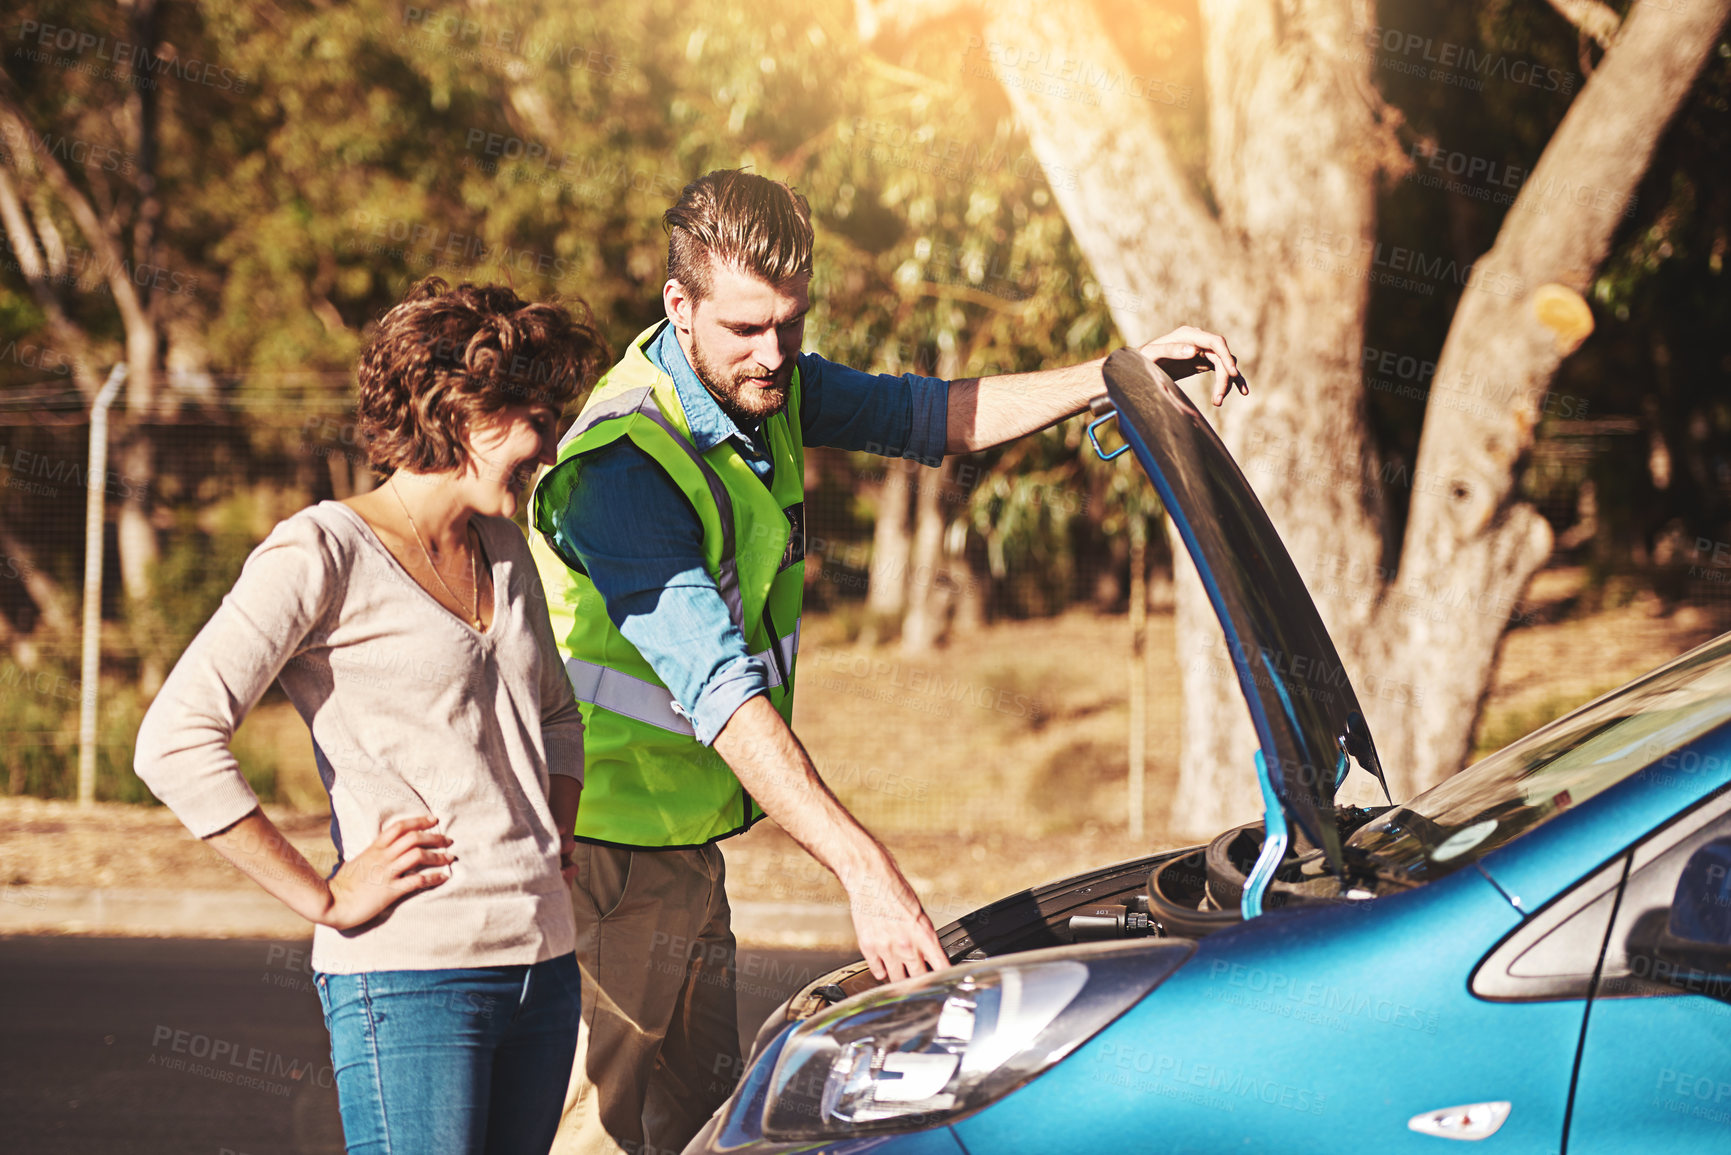 Buy stock photo Shot of a young woman receiving roadside assistance from a young man after breaking down